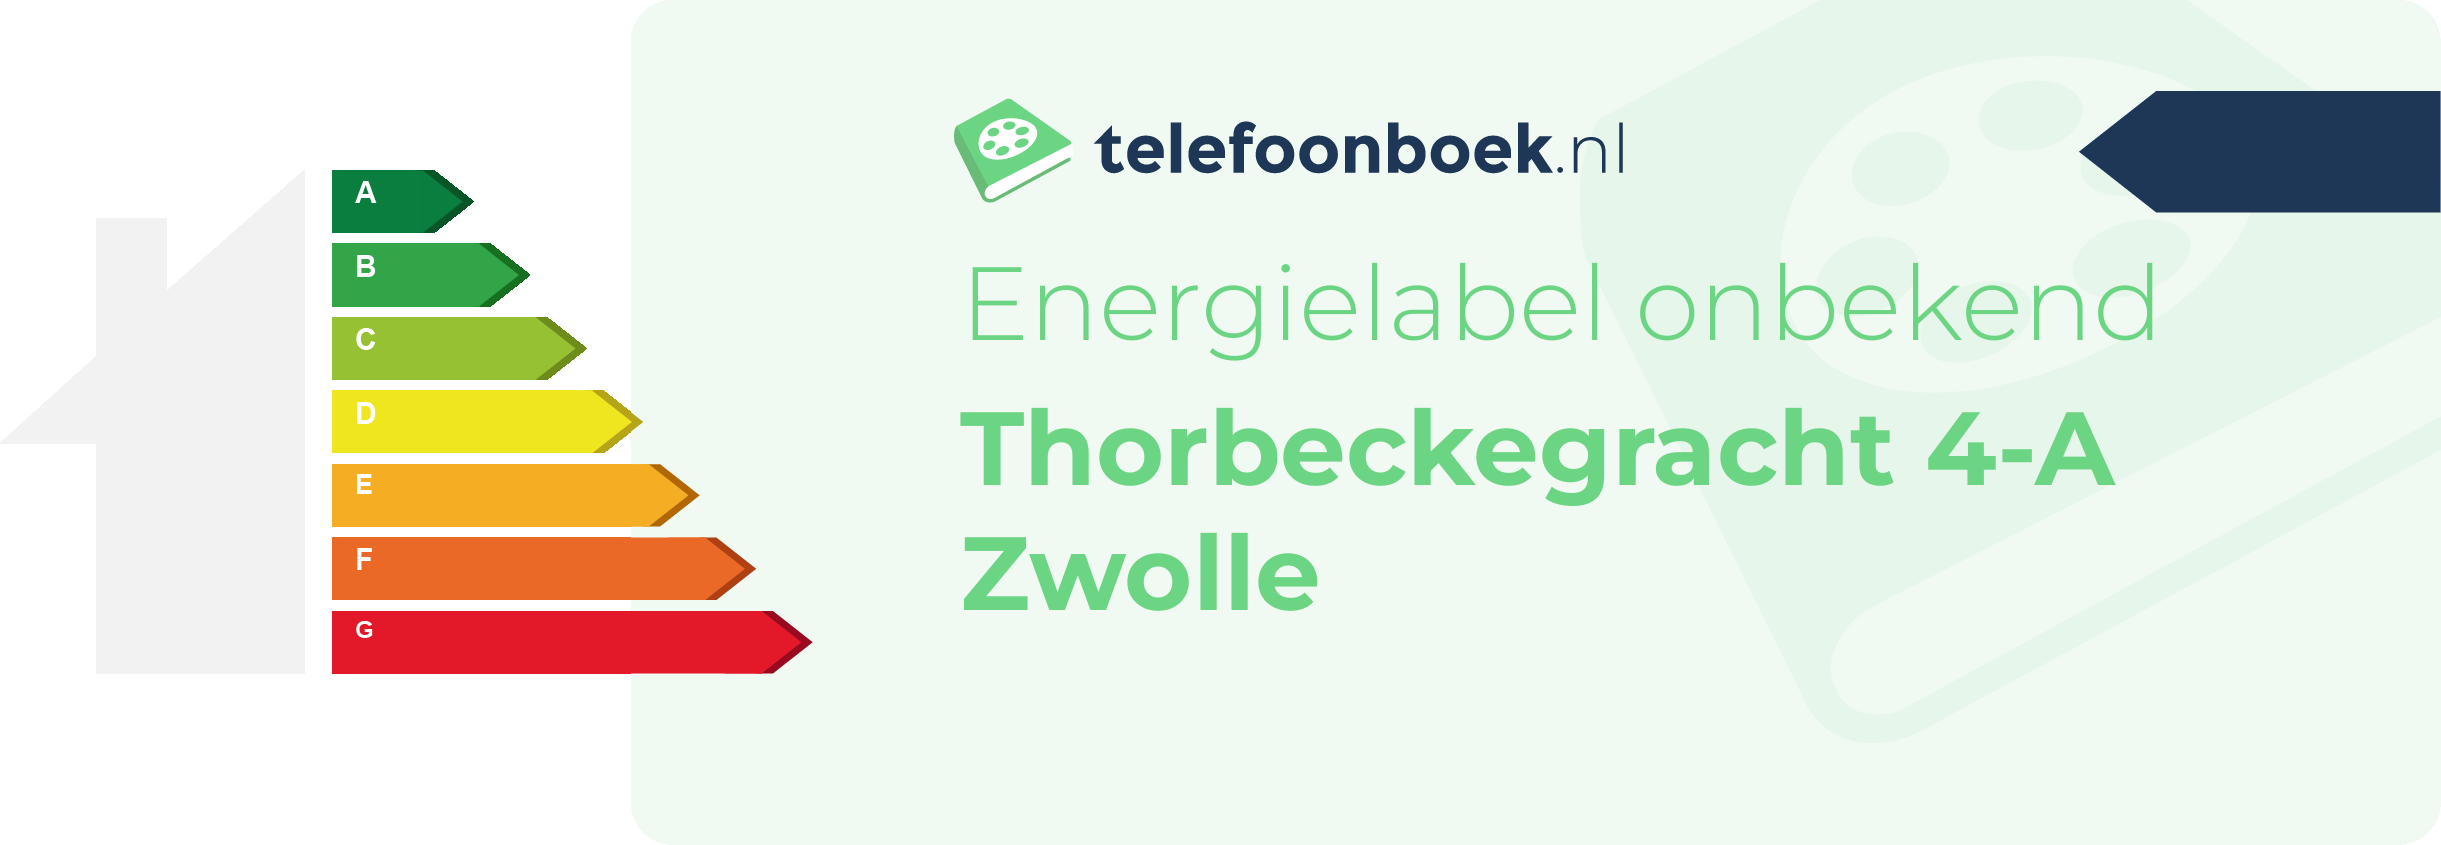 Energielabel Thorbeckegracht 4-A Zwolle